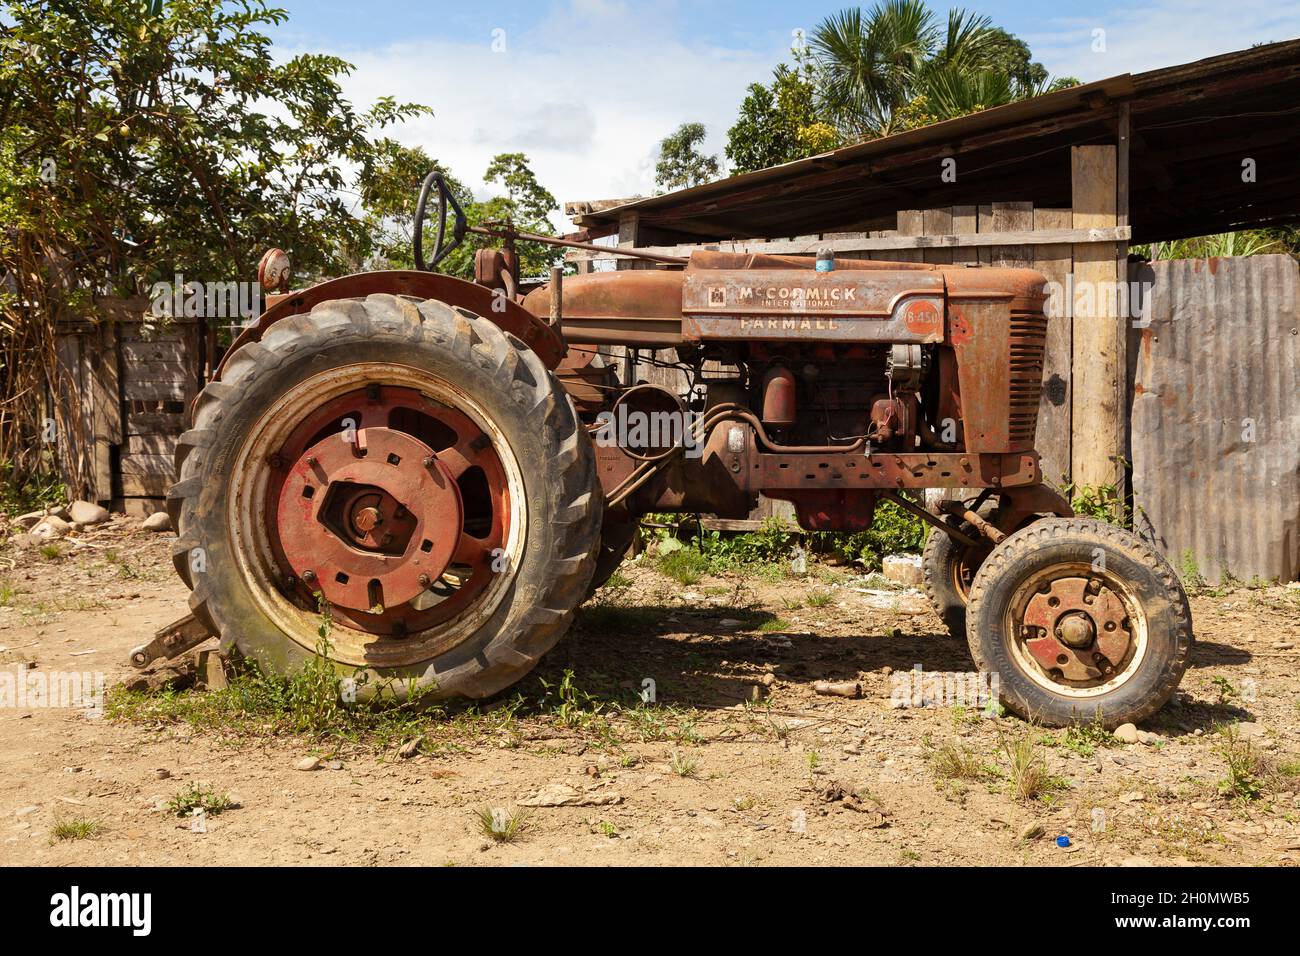 Pilcopata, Peru - April 12, 2014: An old tractor, Mc Cormick International Farmall, totally rusted and abandoned, in one of the streets of Pilcopata Stock Photo